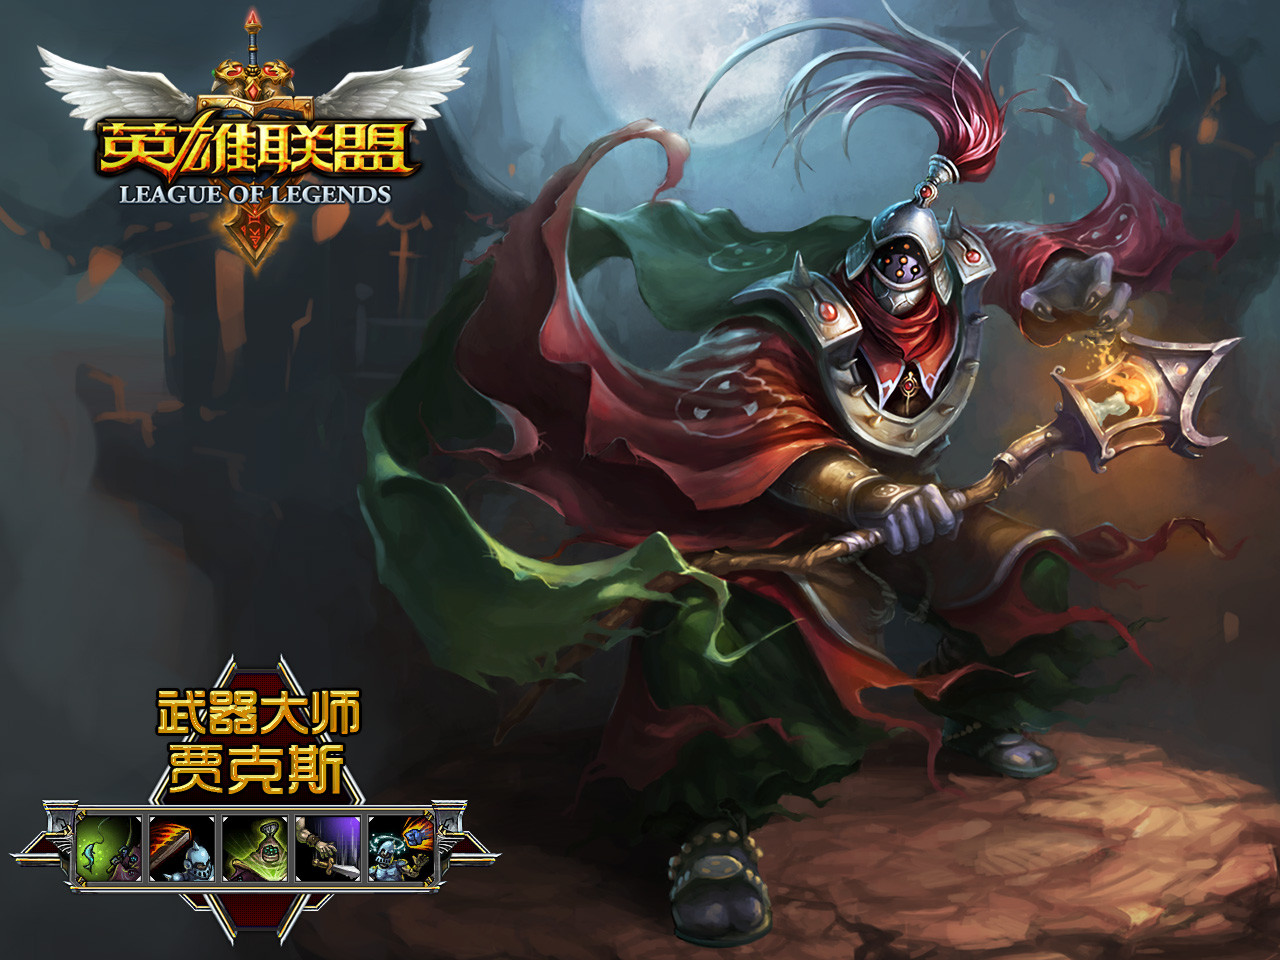 Chinese Jax wallpaper. Its what I have as my desktop right now. :3